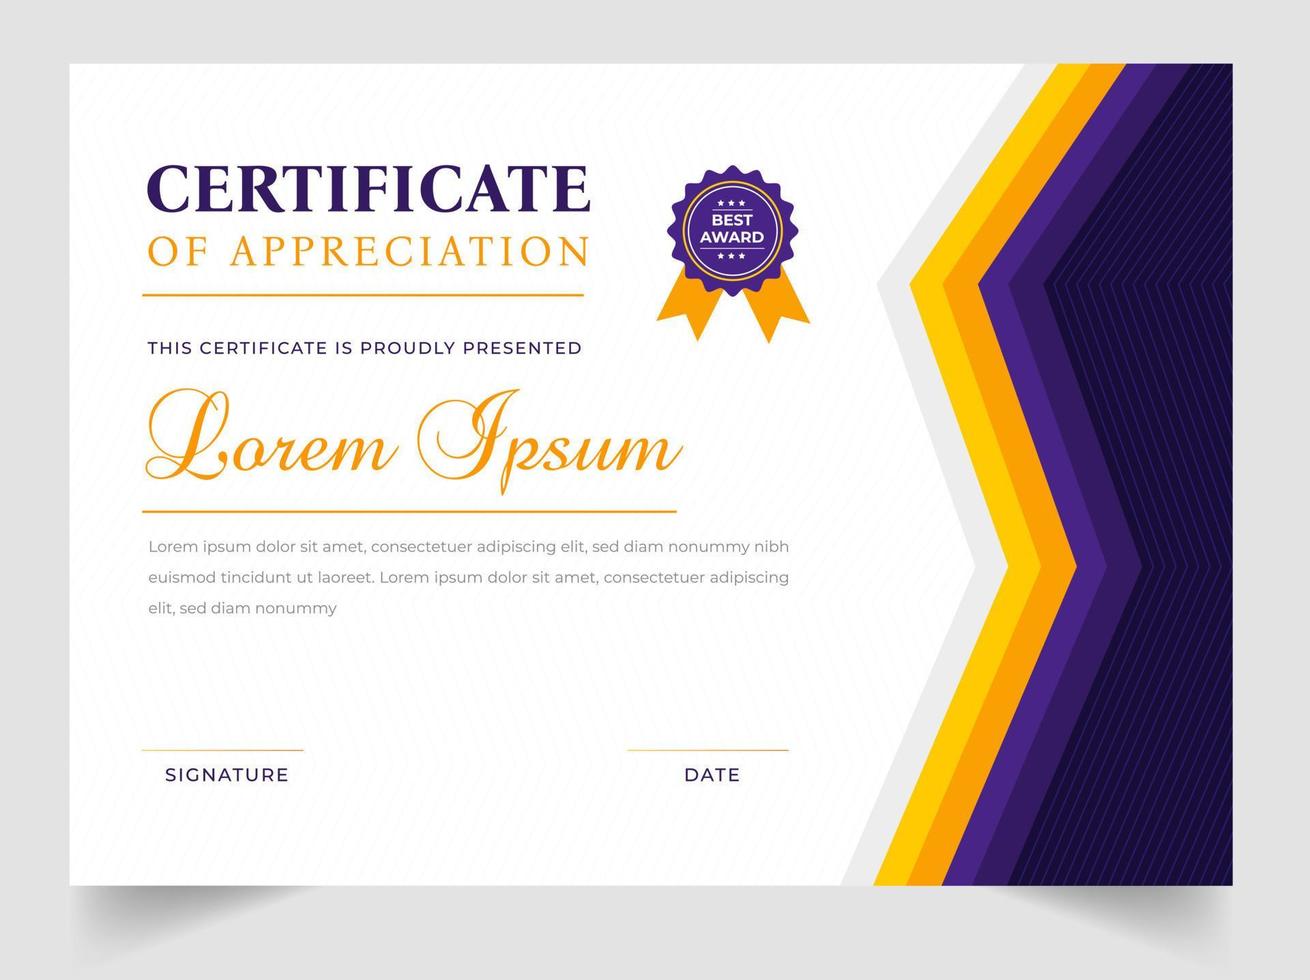 Certificate template in vector for achievement graduation completion. Certificate of appreciation template,  Clean modern certificate with gold badge.  luxury badge and modern line pattern Certificate